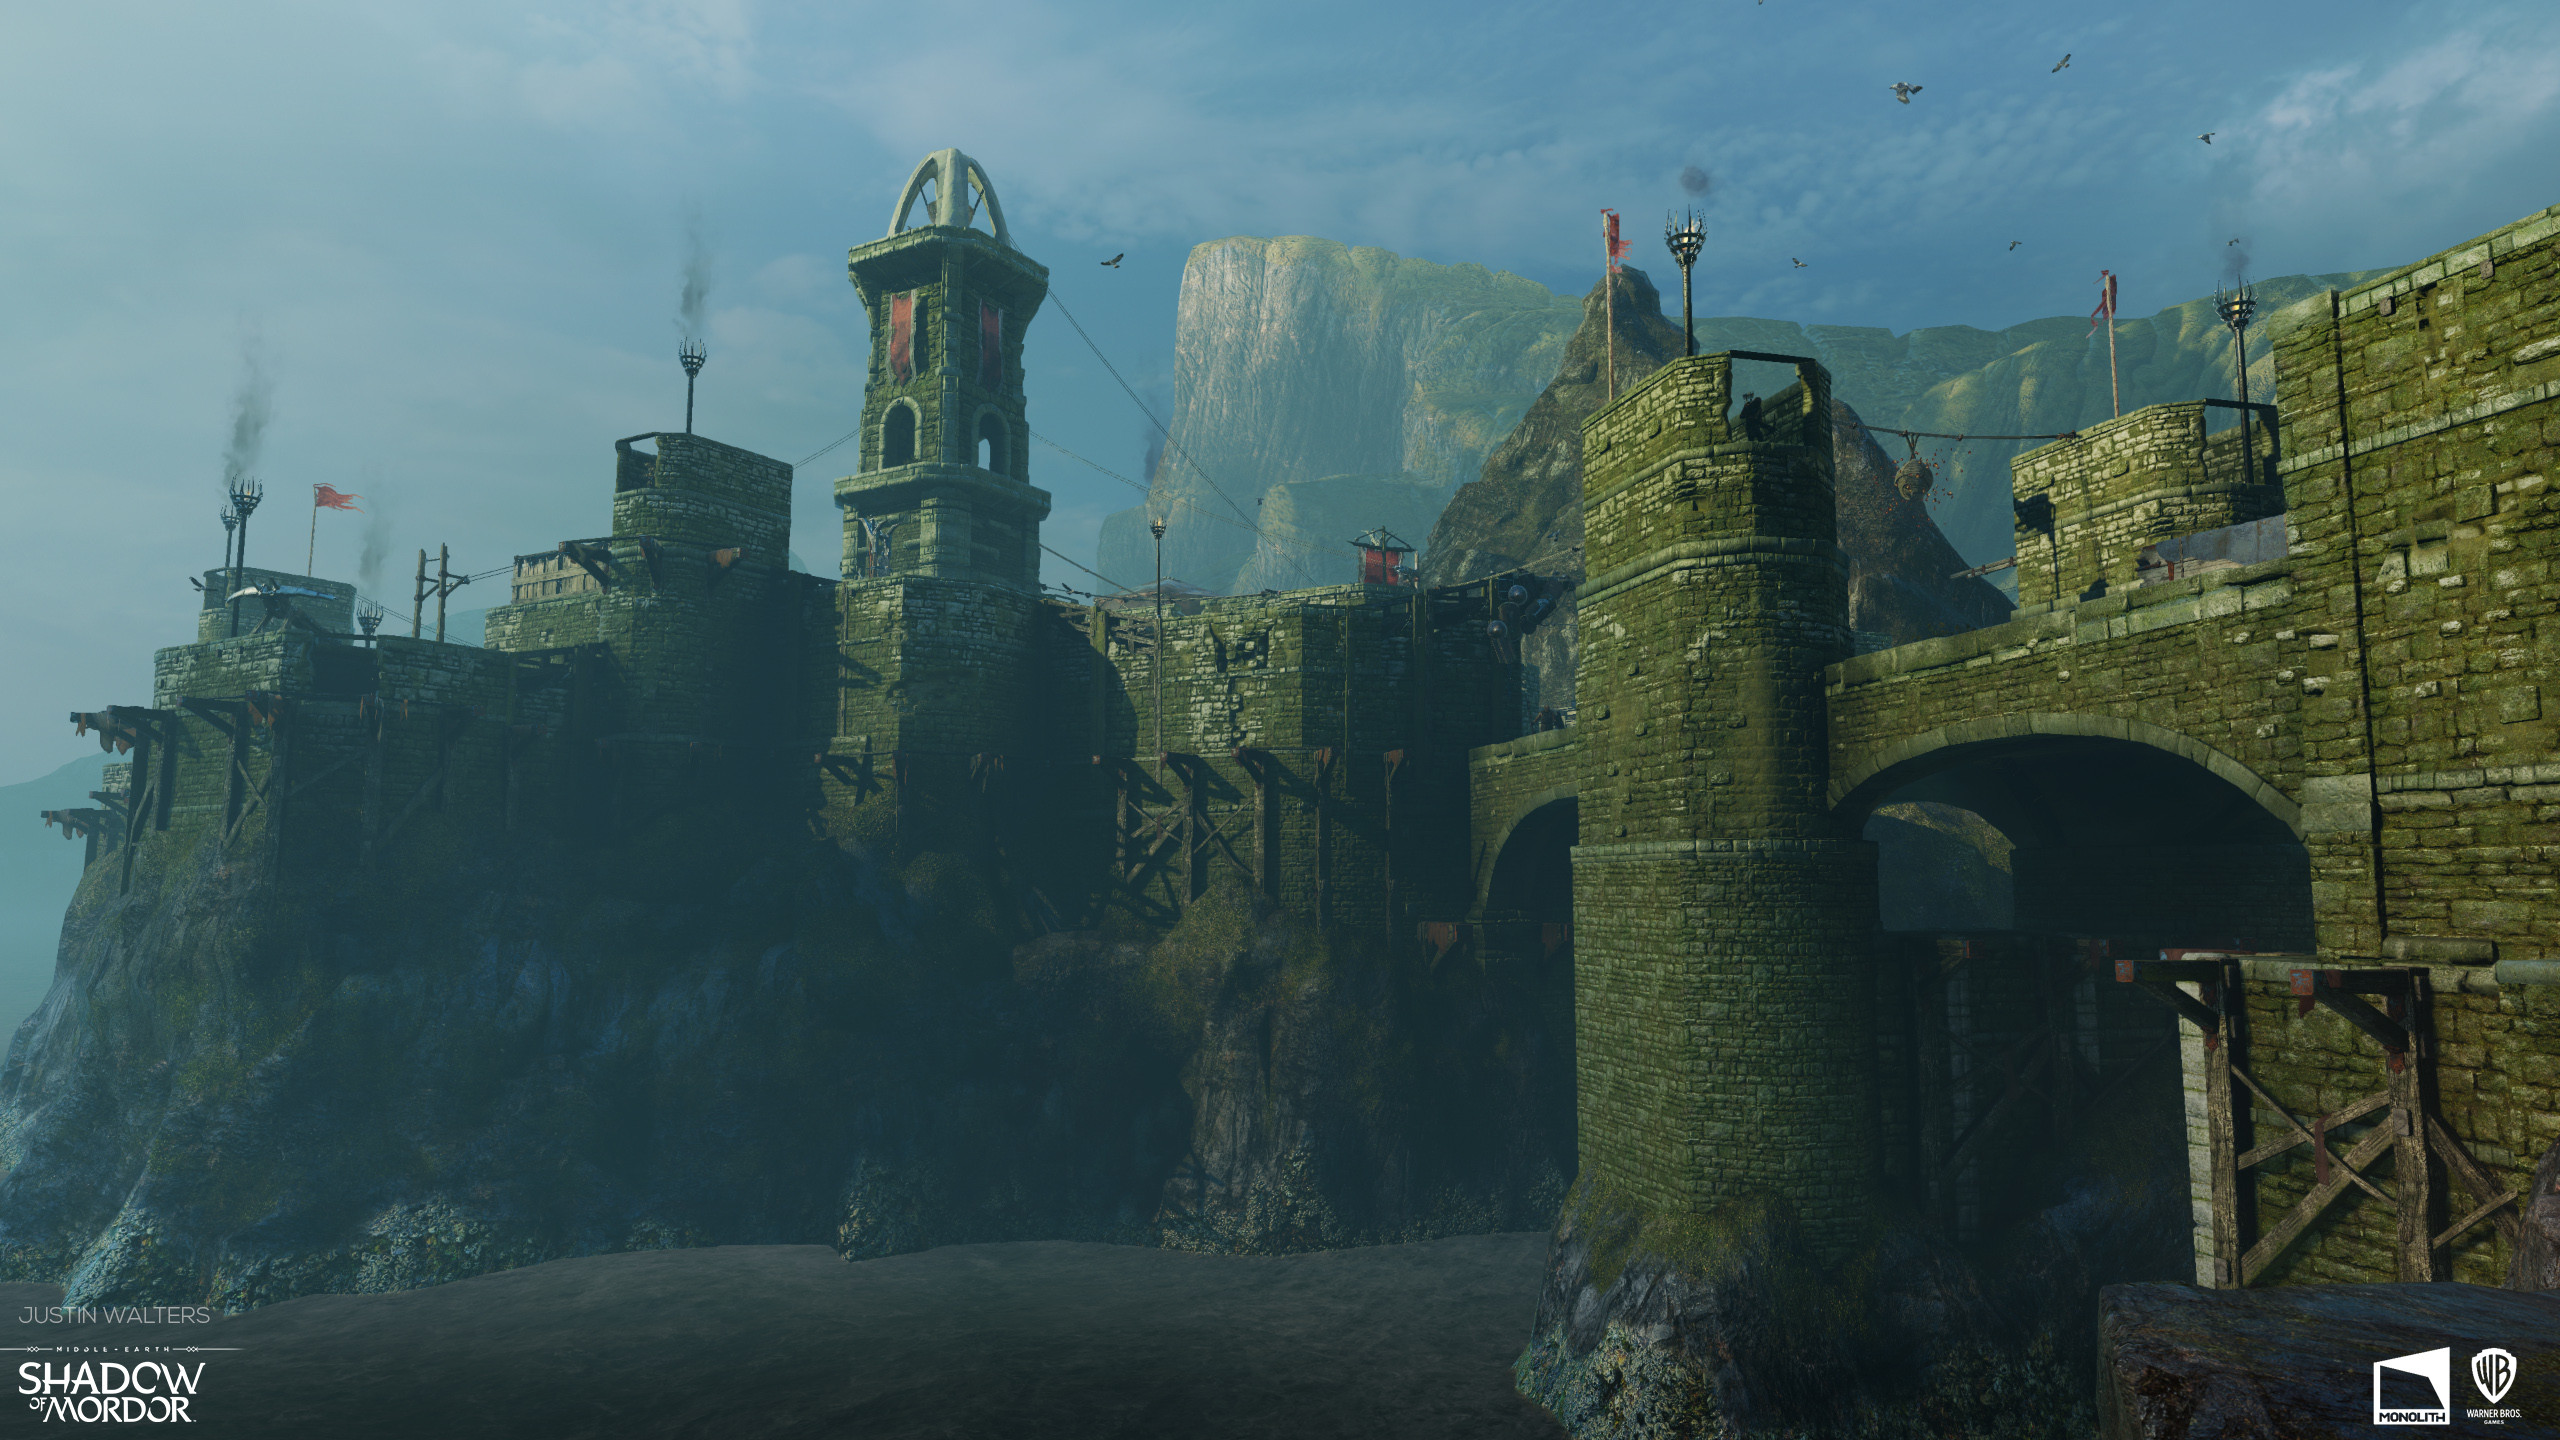 Strongholds in the Sea of Núrnen. Responsible for materials, models, vertex painting, player movement design on large climbing surfaces, and optimization. Layout was complete when I started this area, I polished and finished the area.